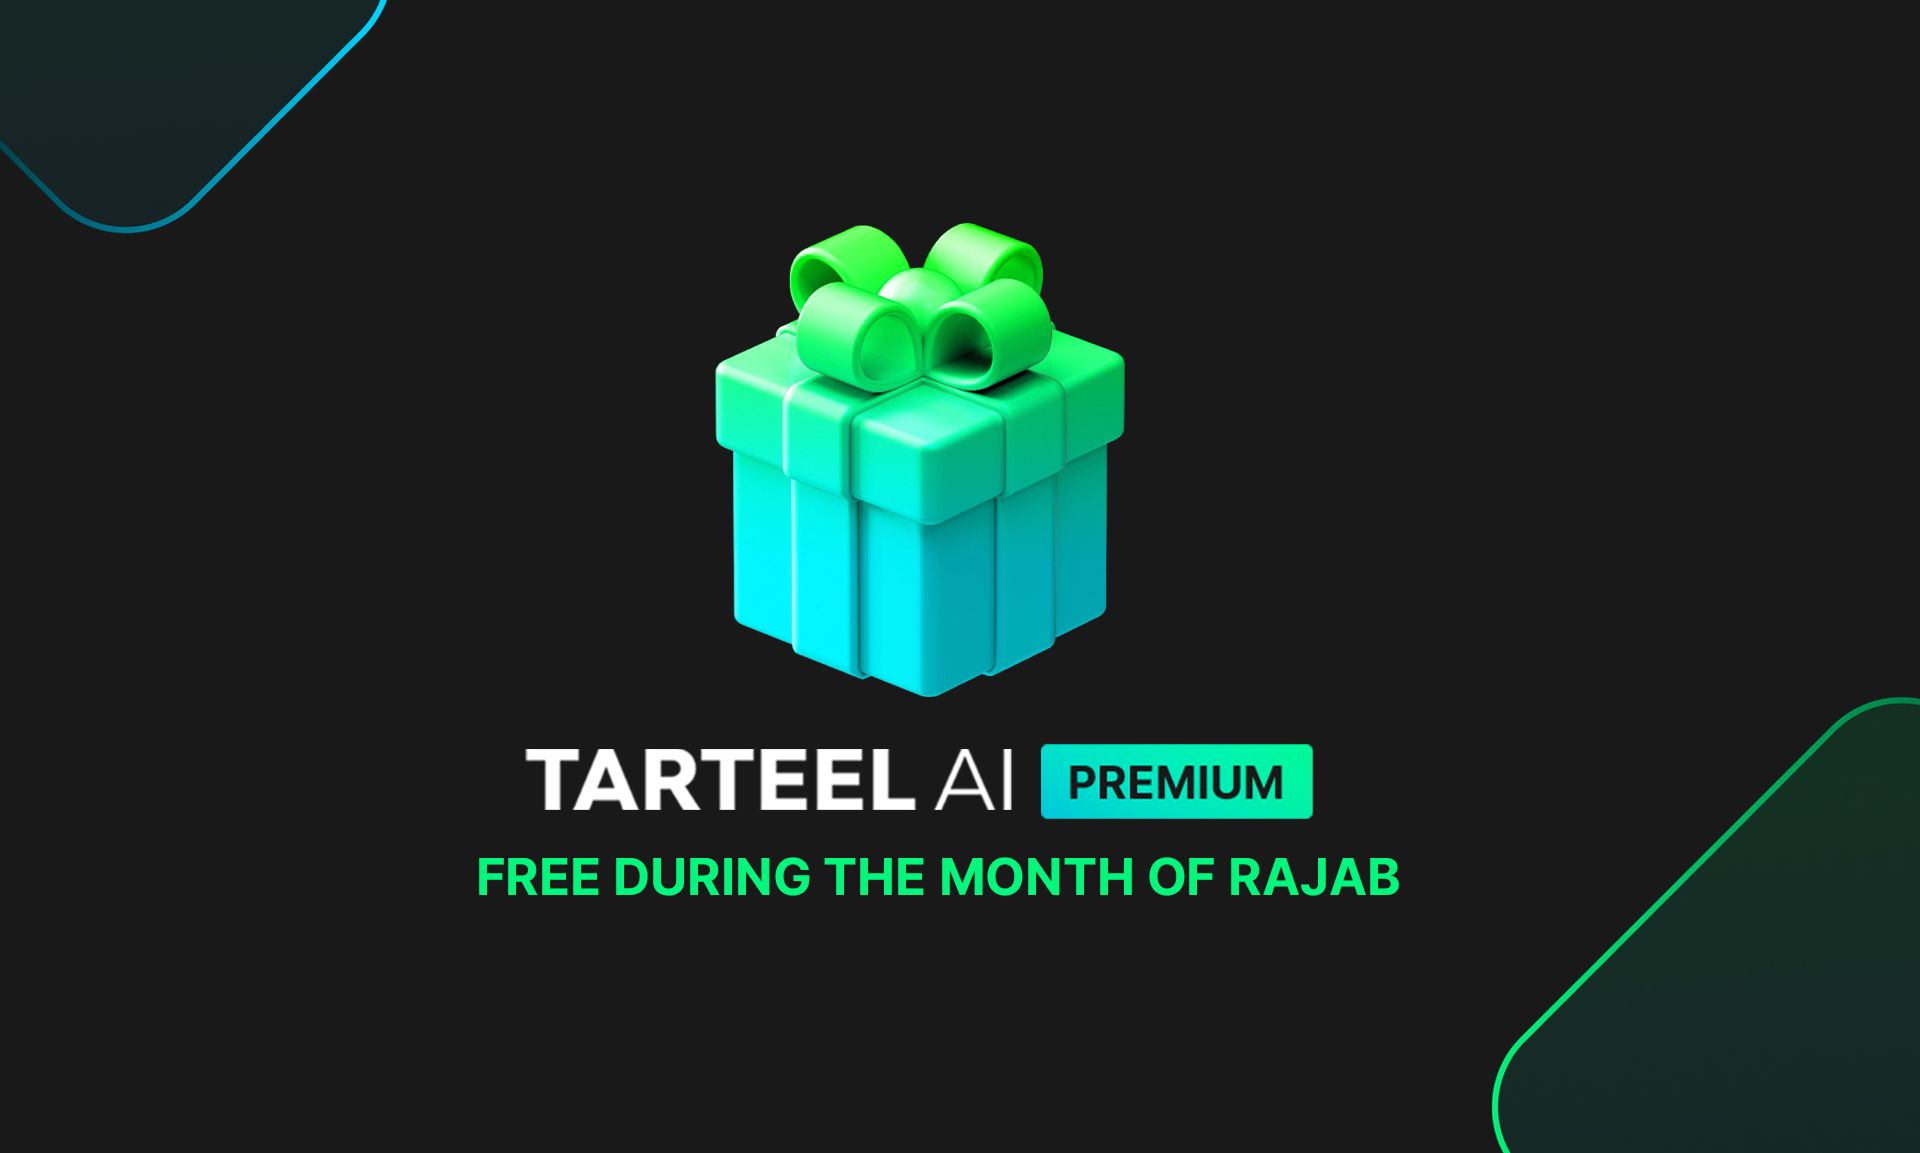 Boost Your Qur'an Memorization with AI. Here's How to Access Tarteel Premium for Free!